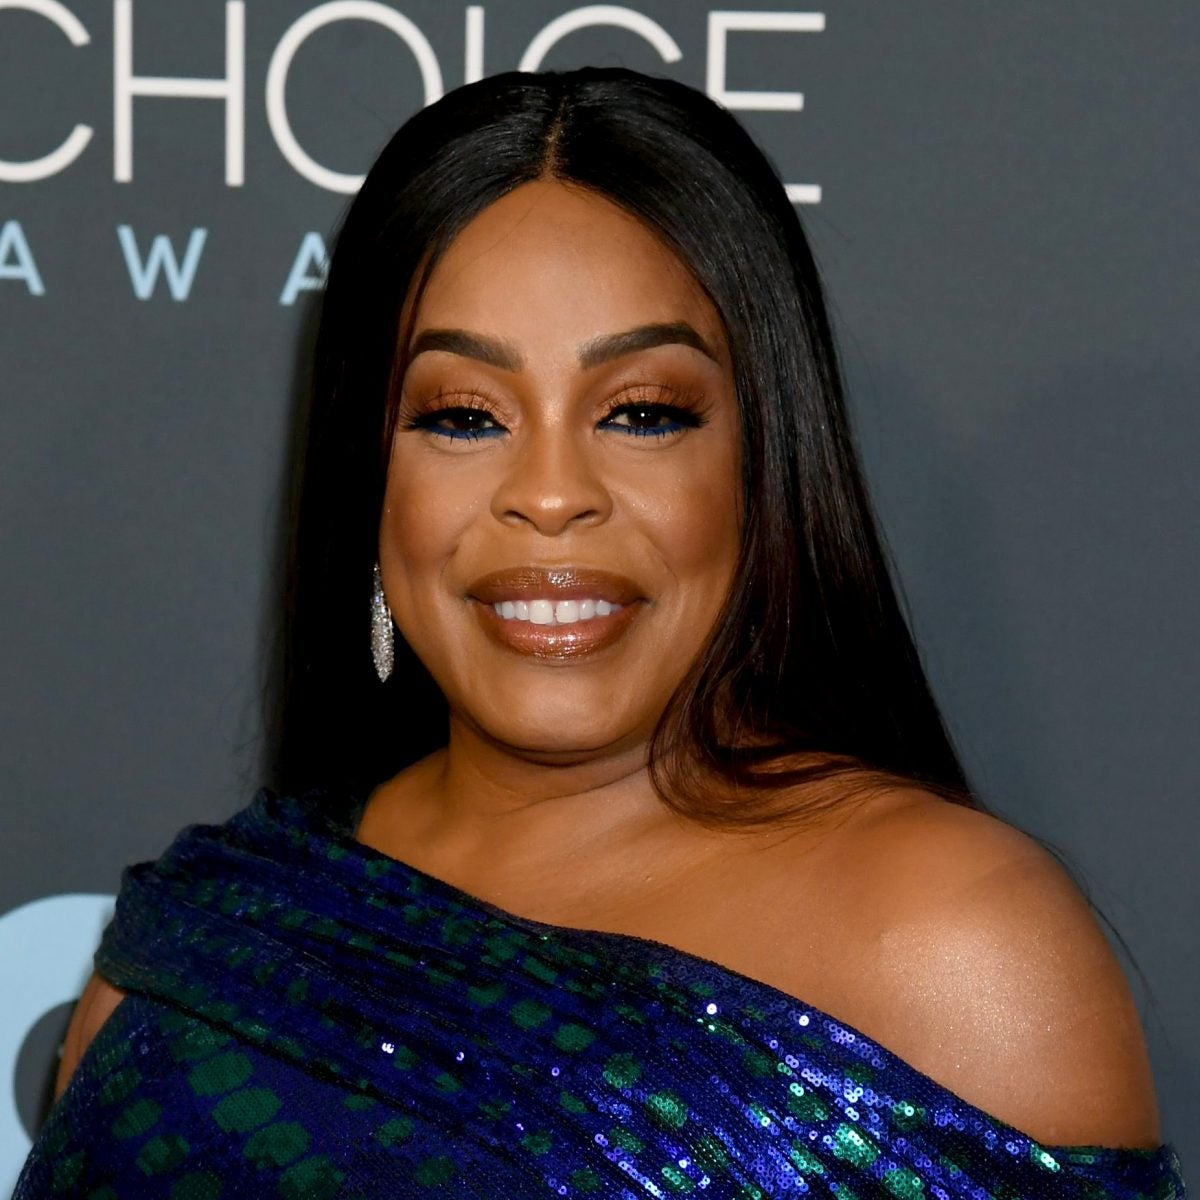 Niecy Nash, Essence Atkins And More To Appear In New Series 'Behind Her Faith'